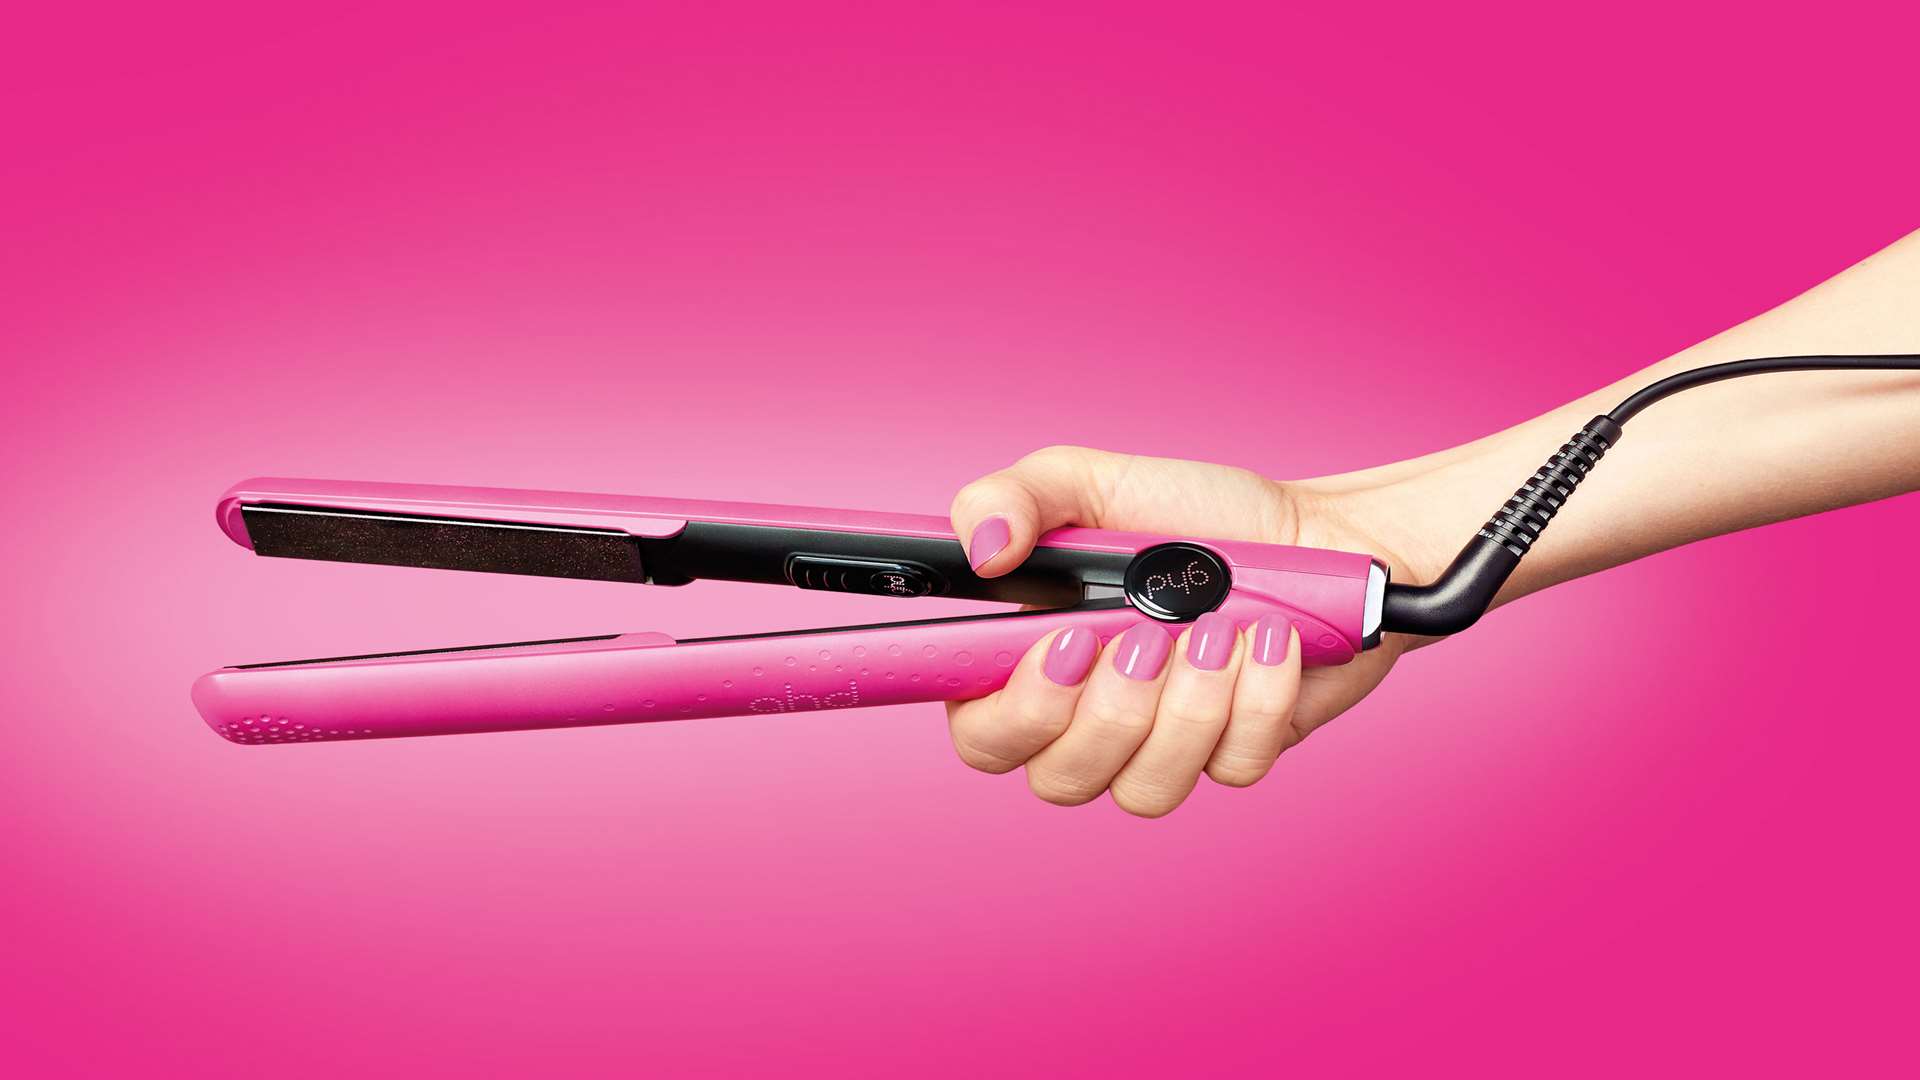 the GHD Limited Edition Electric Pink V Styler and Roll Bag